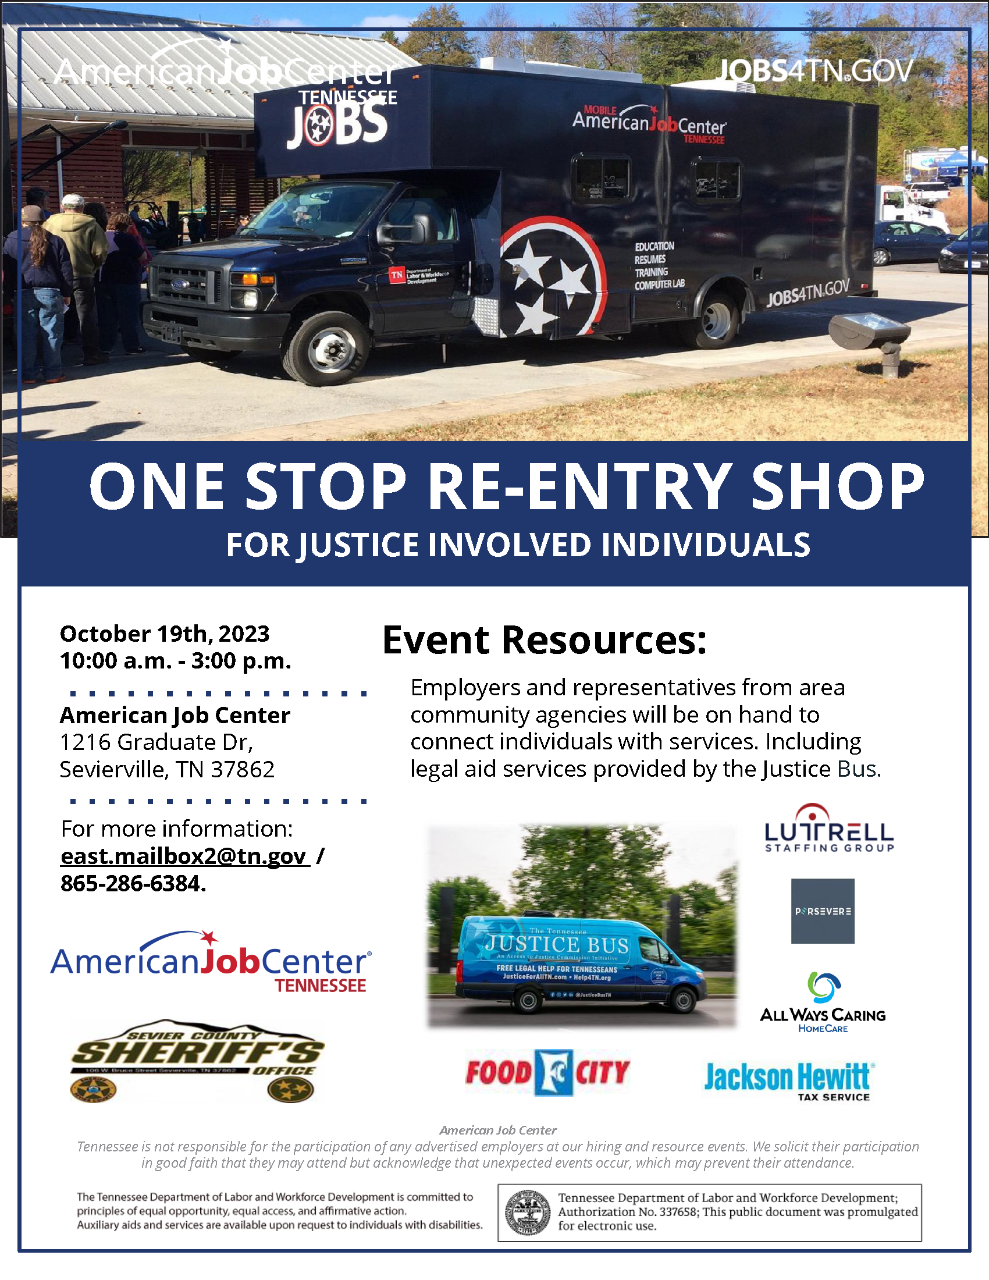 One-Stop-Reentry-Shop-Sevierville-AJC-TN-2023-10-19